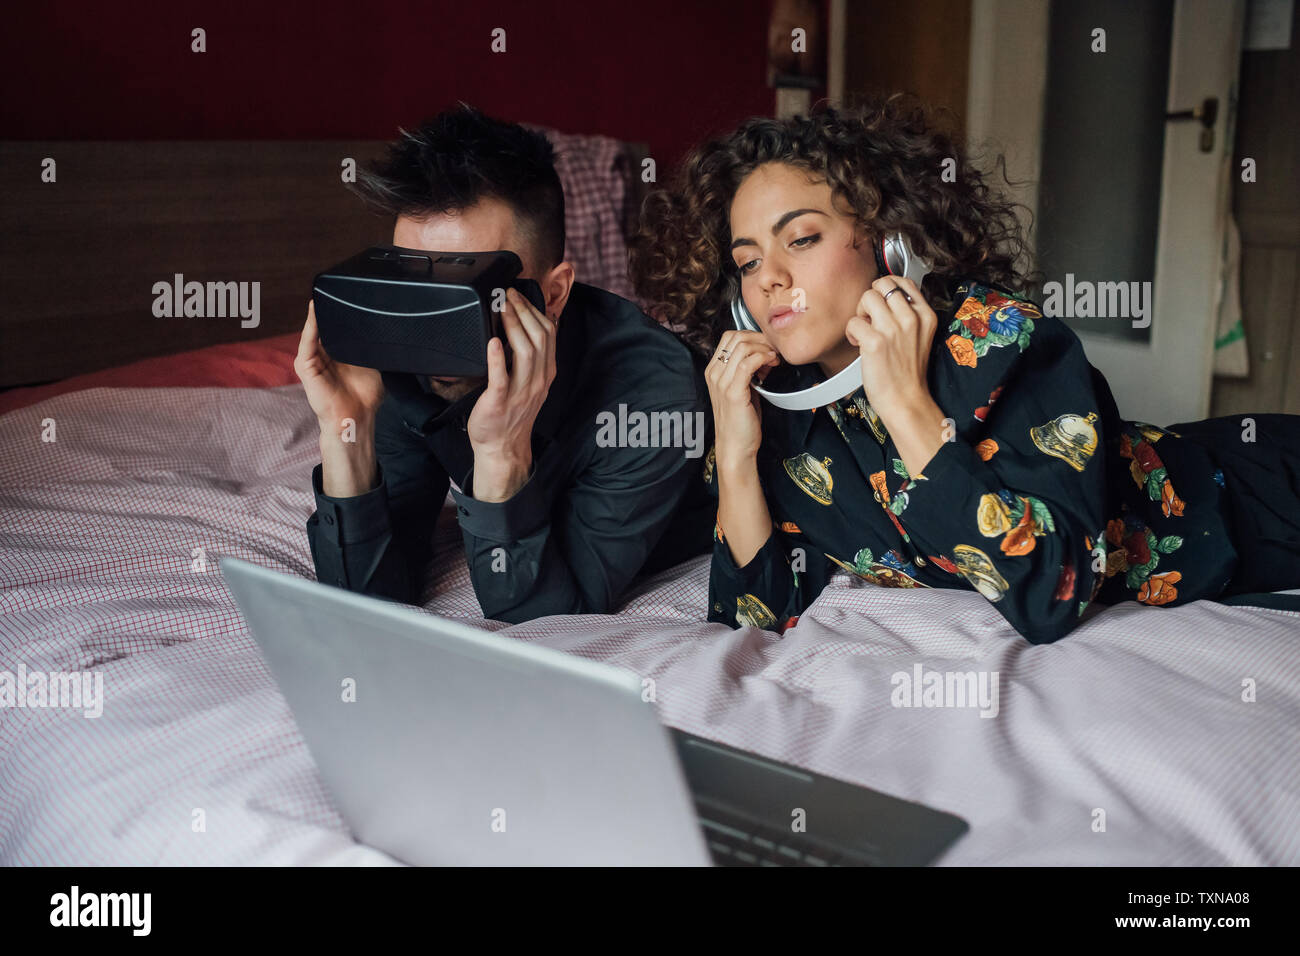 Couple using VR headset and laptop on bed Stock Photo